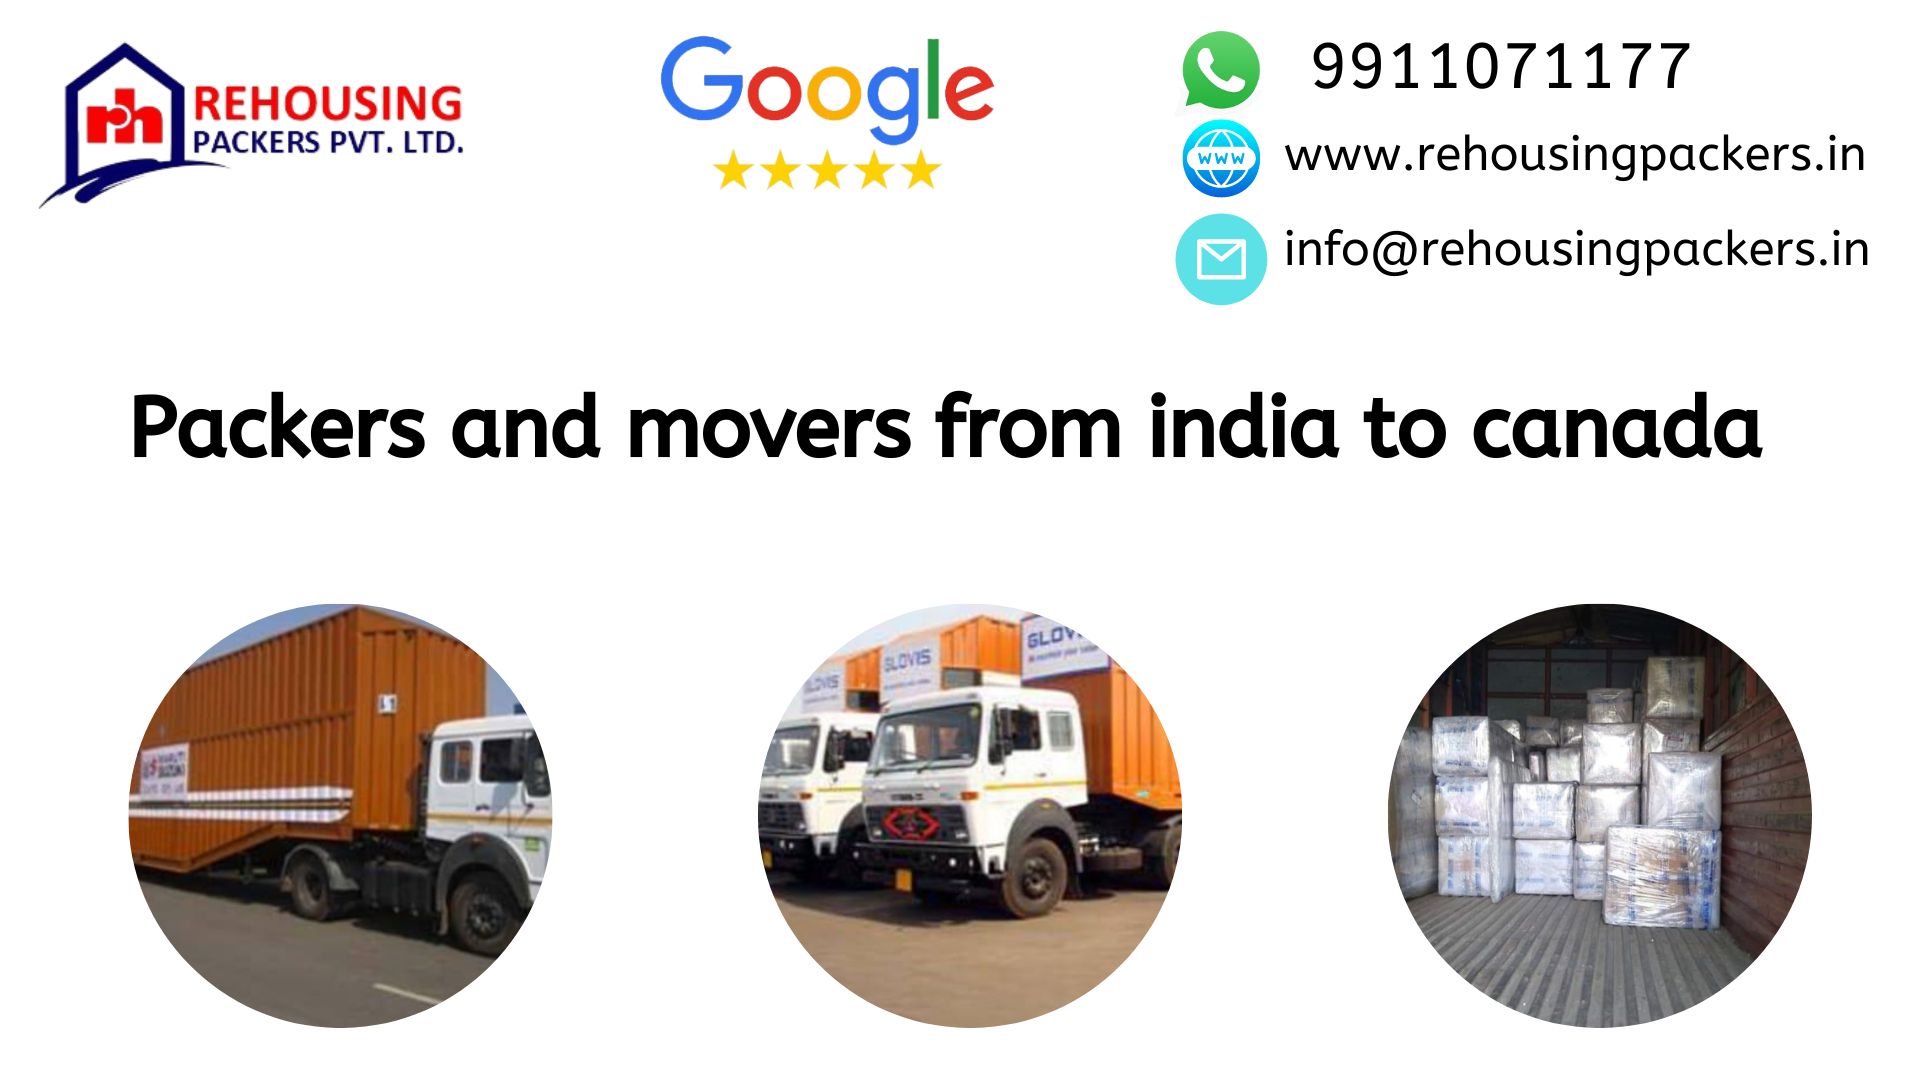 Benefits of hiring Packers and movers from India to Canada